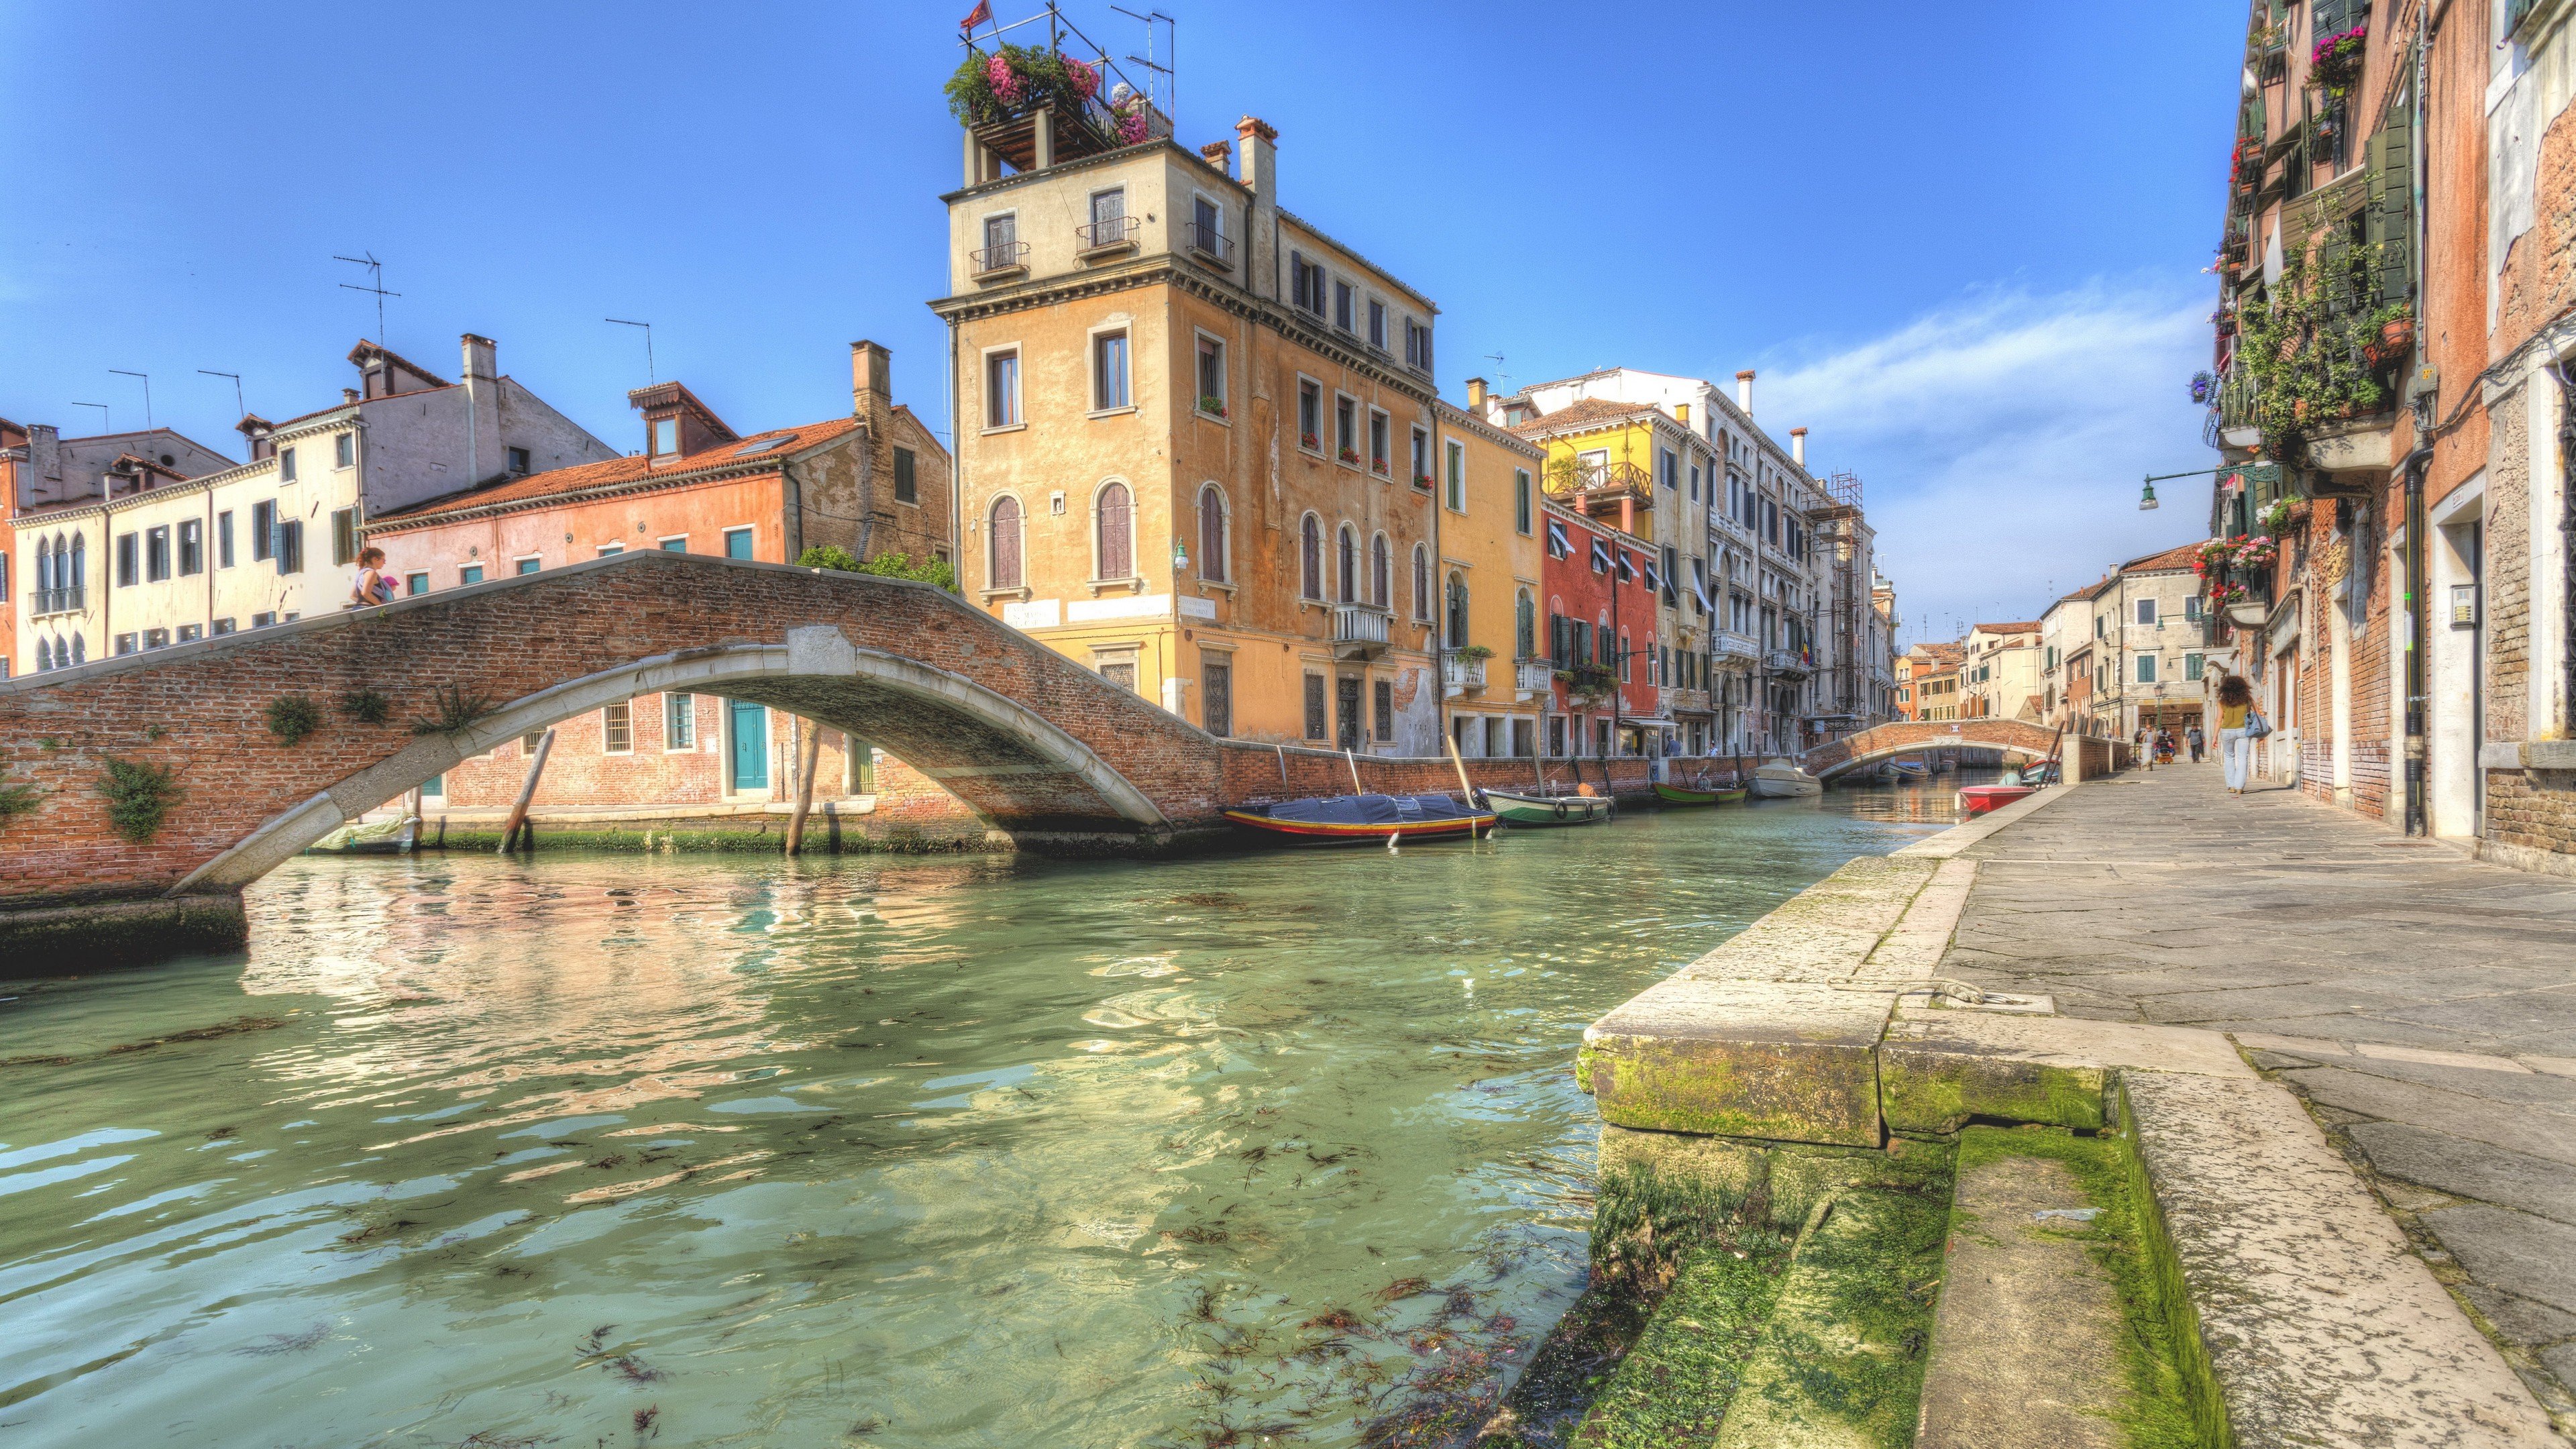 architecture, Building, Old building, Water, Venice, Italy, Bridge, Street, Historic, Boat Wallpaper